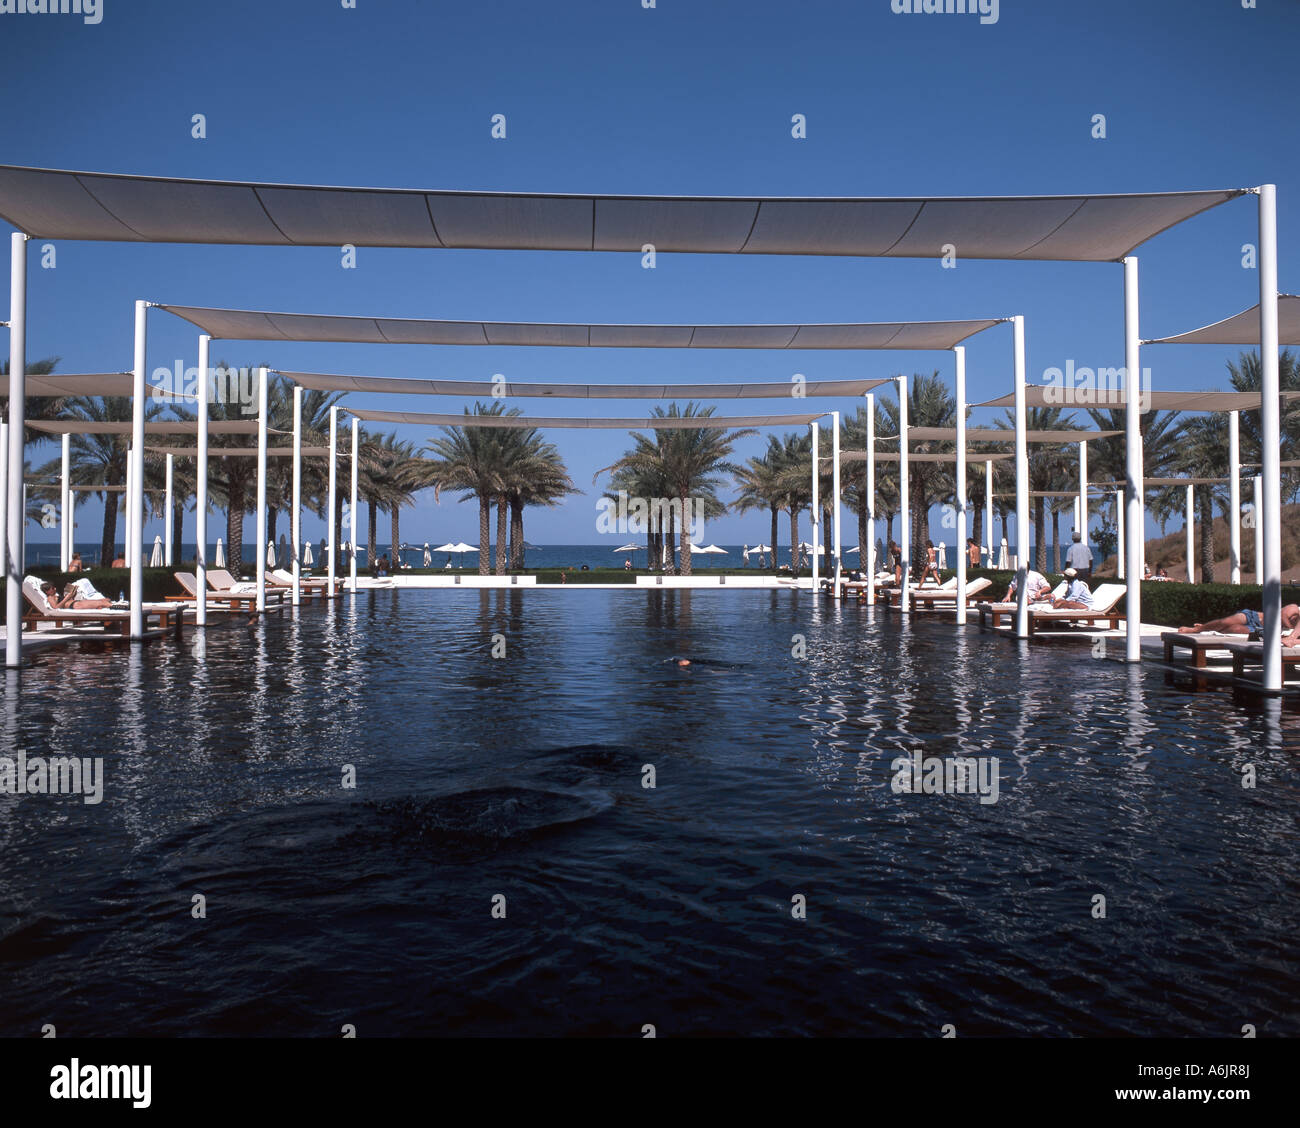 The Chedi Muscat Hotel swimming pool, Chedi, Muscat, Masqat Governorate, Sultanate of Oman Stock Photo